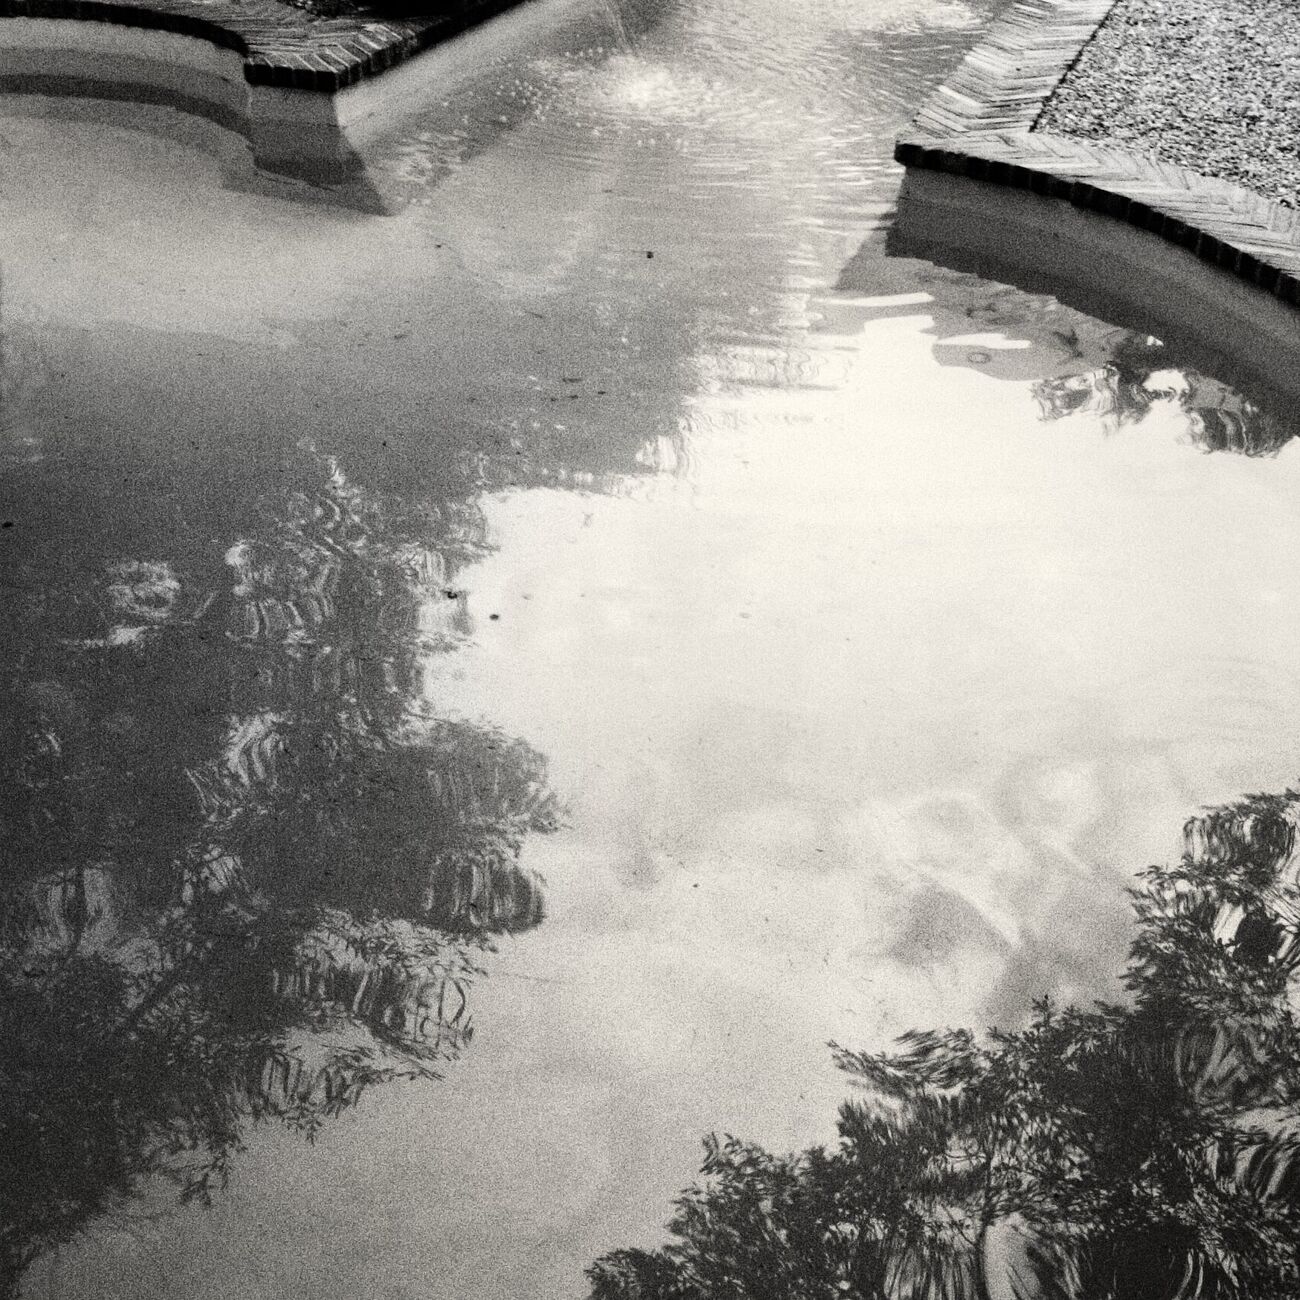 Buy a 5.1 x 5.1 in, Dali's swimming pool. Ref-458-18 - Denis Olivier Art Photography